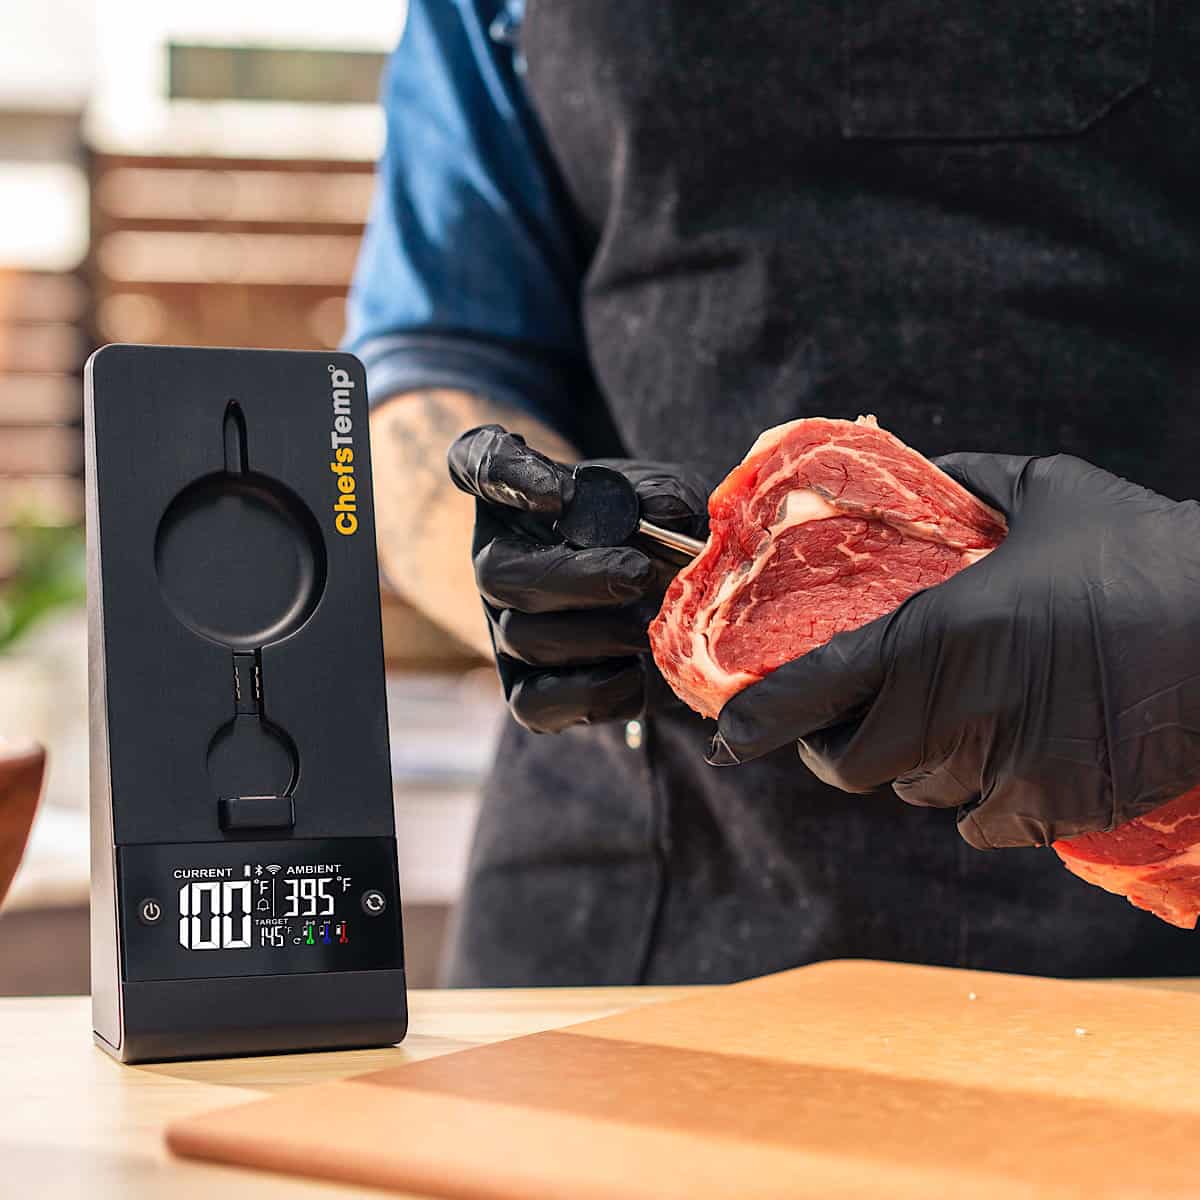 ChefsTemp ProTemp Plus Wireless Meat Thermometer Wi-Fi and Bluetooth